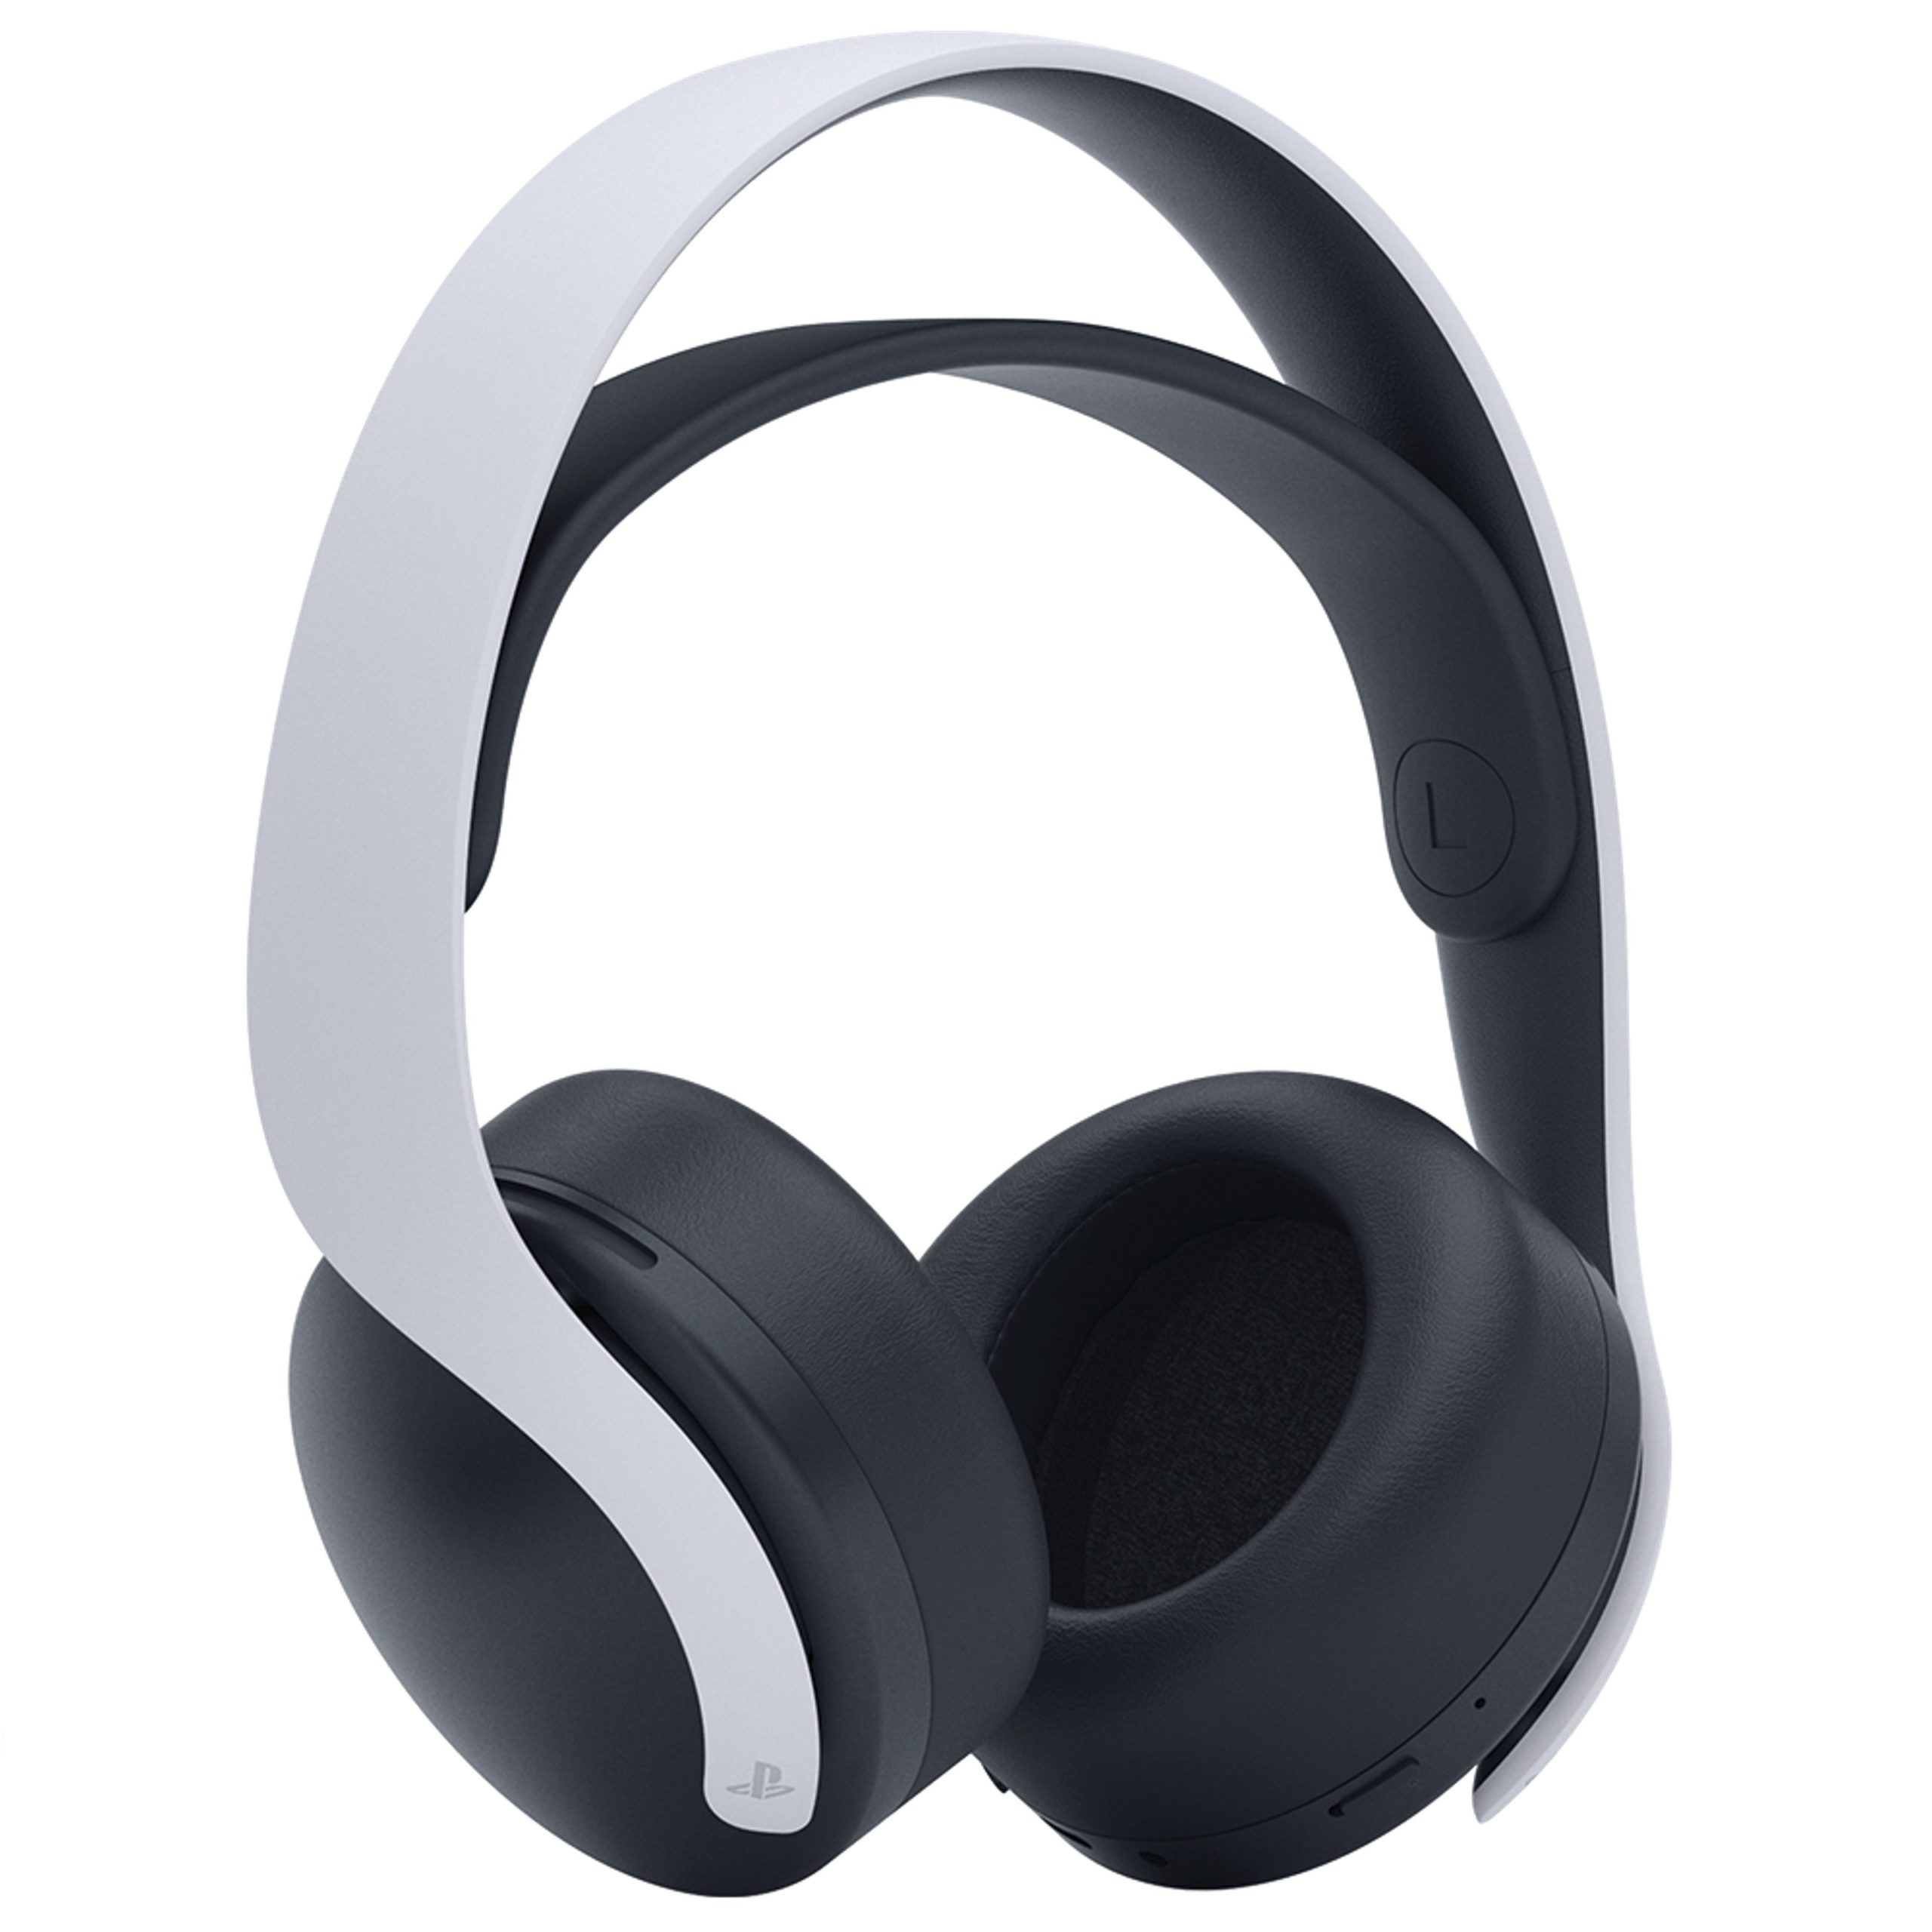 Sony Pulse 3D Wireless Headset PS5 White (New)